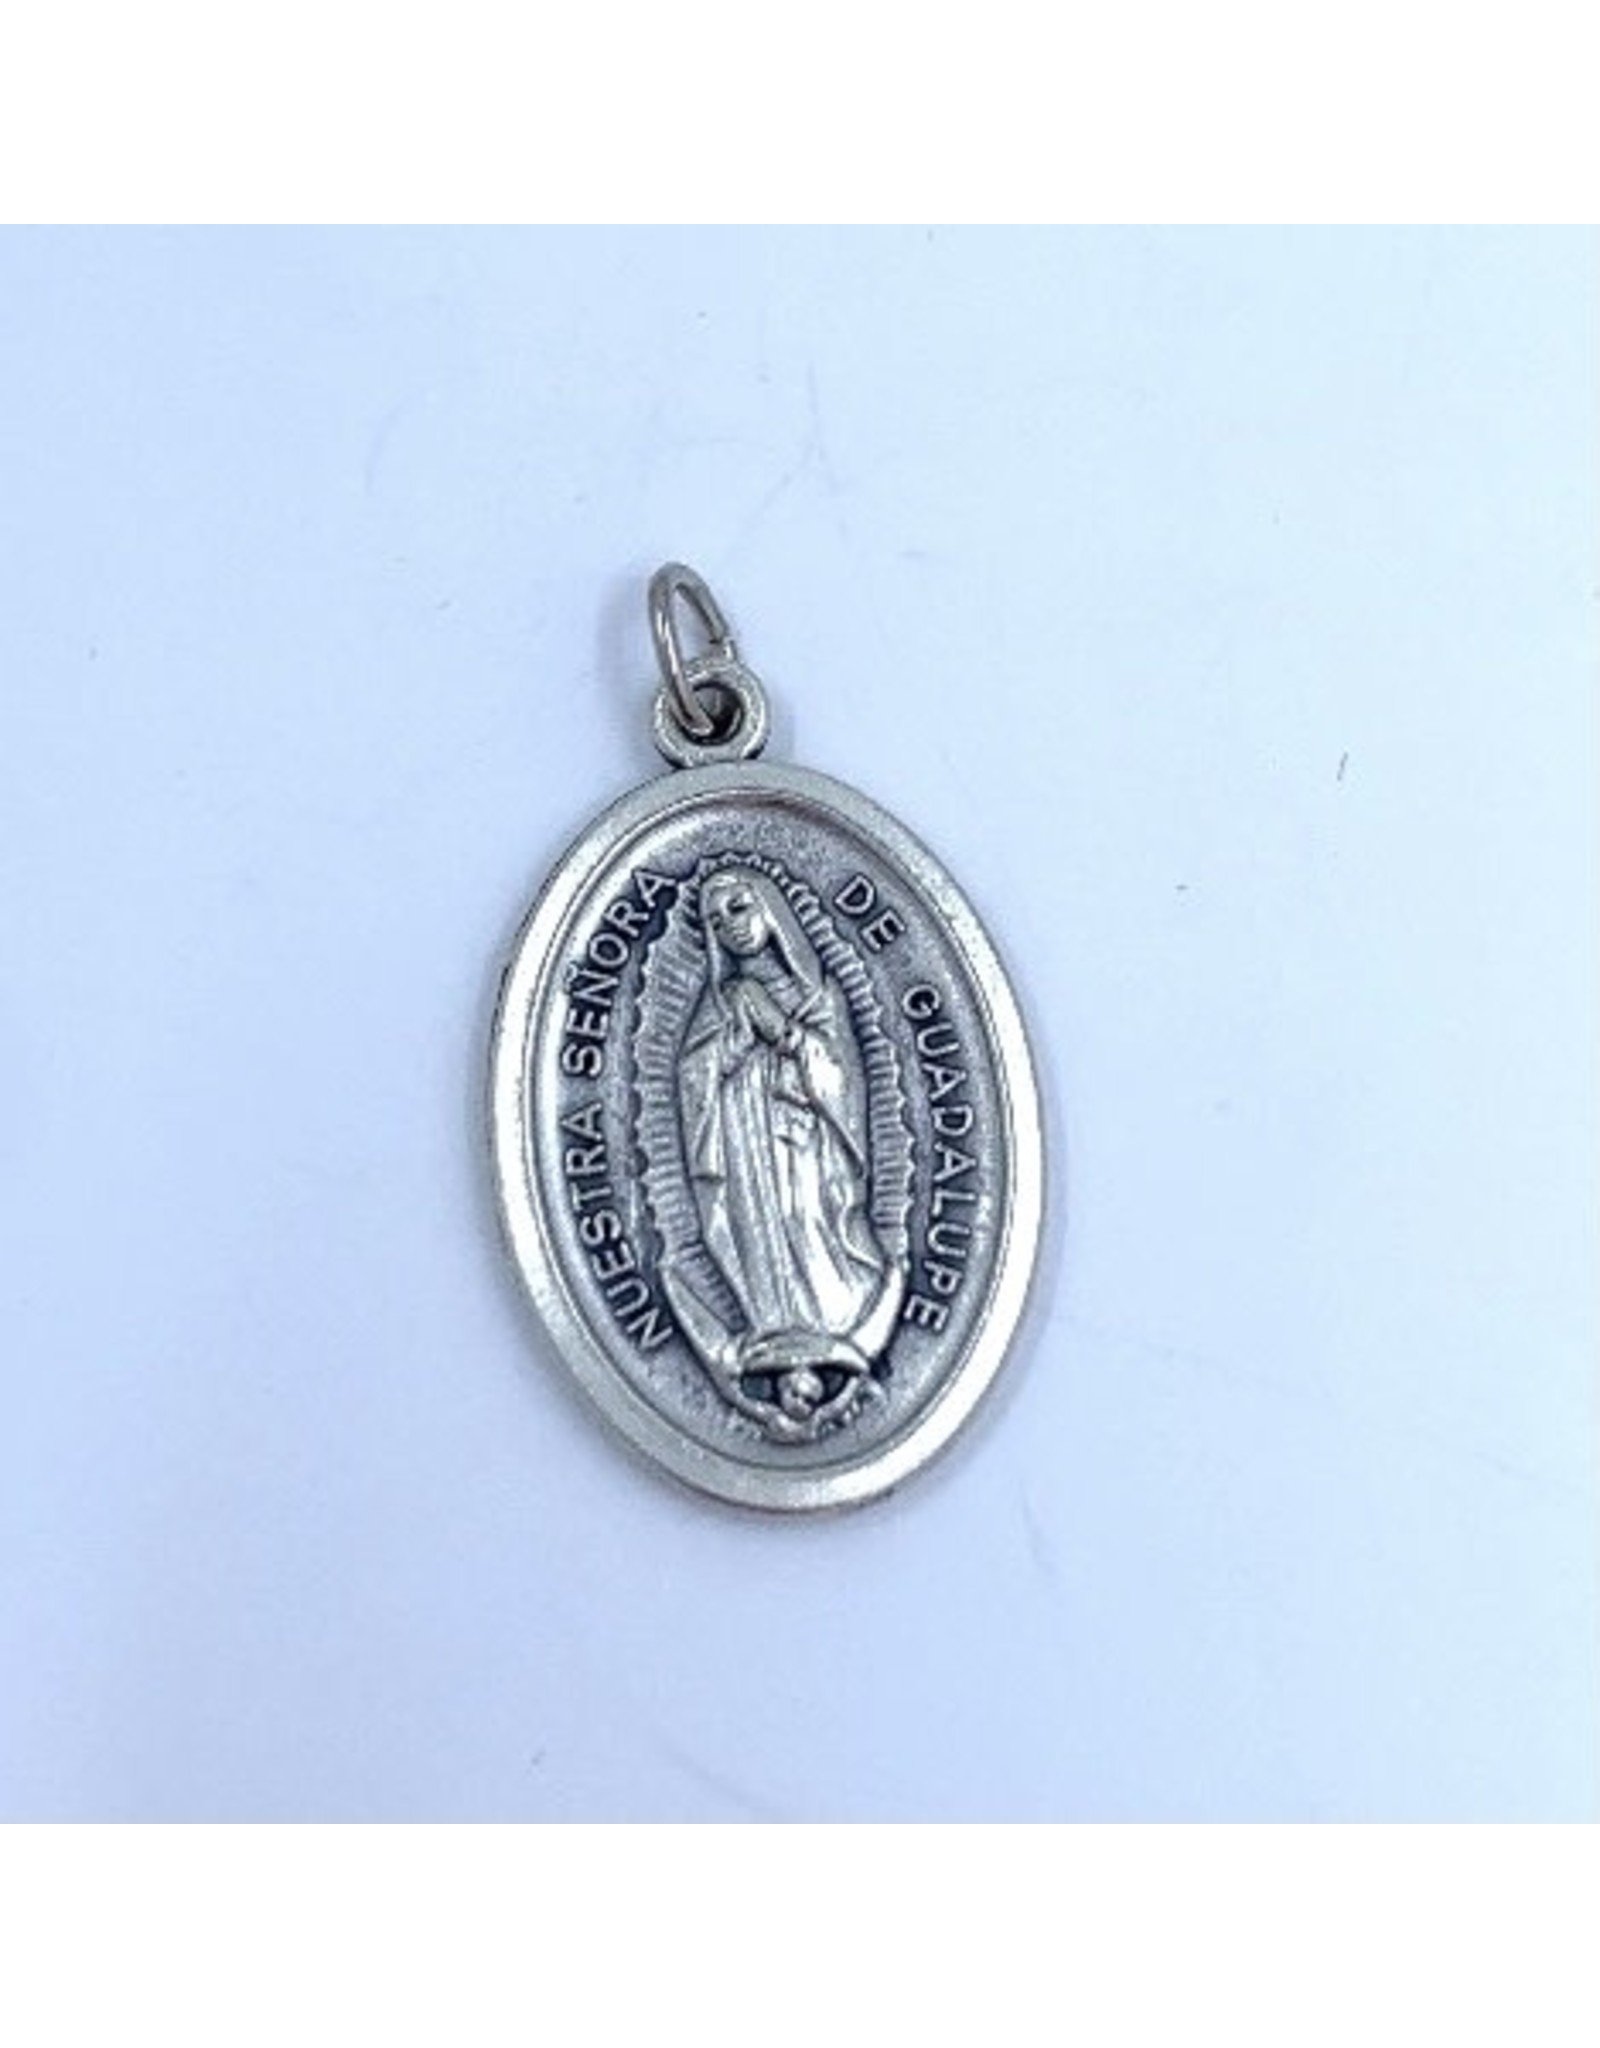 Devon Our Lady of Guadalupe Medal with Prayer Card